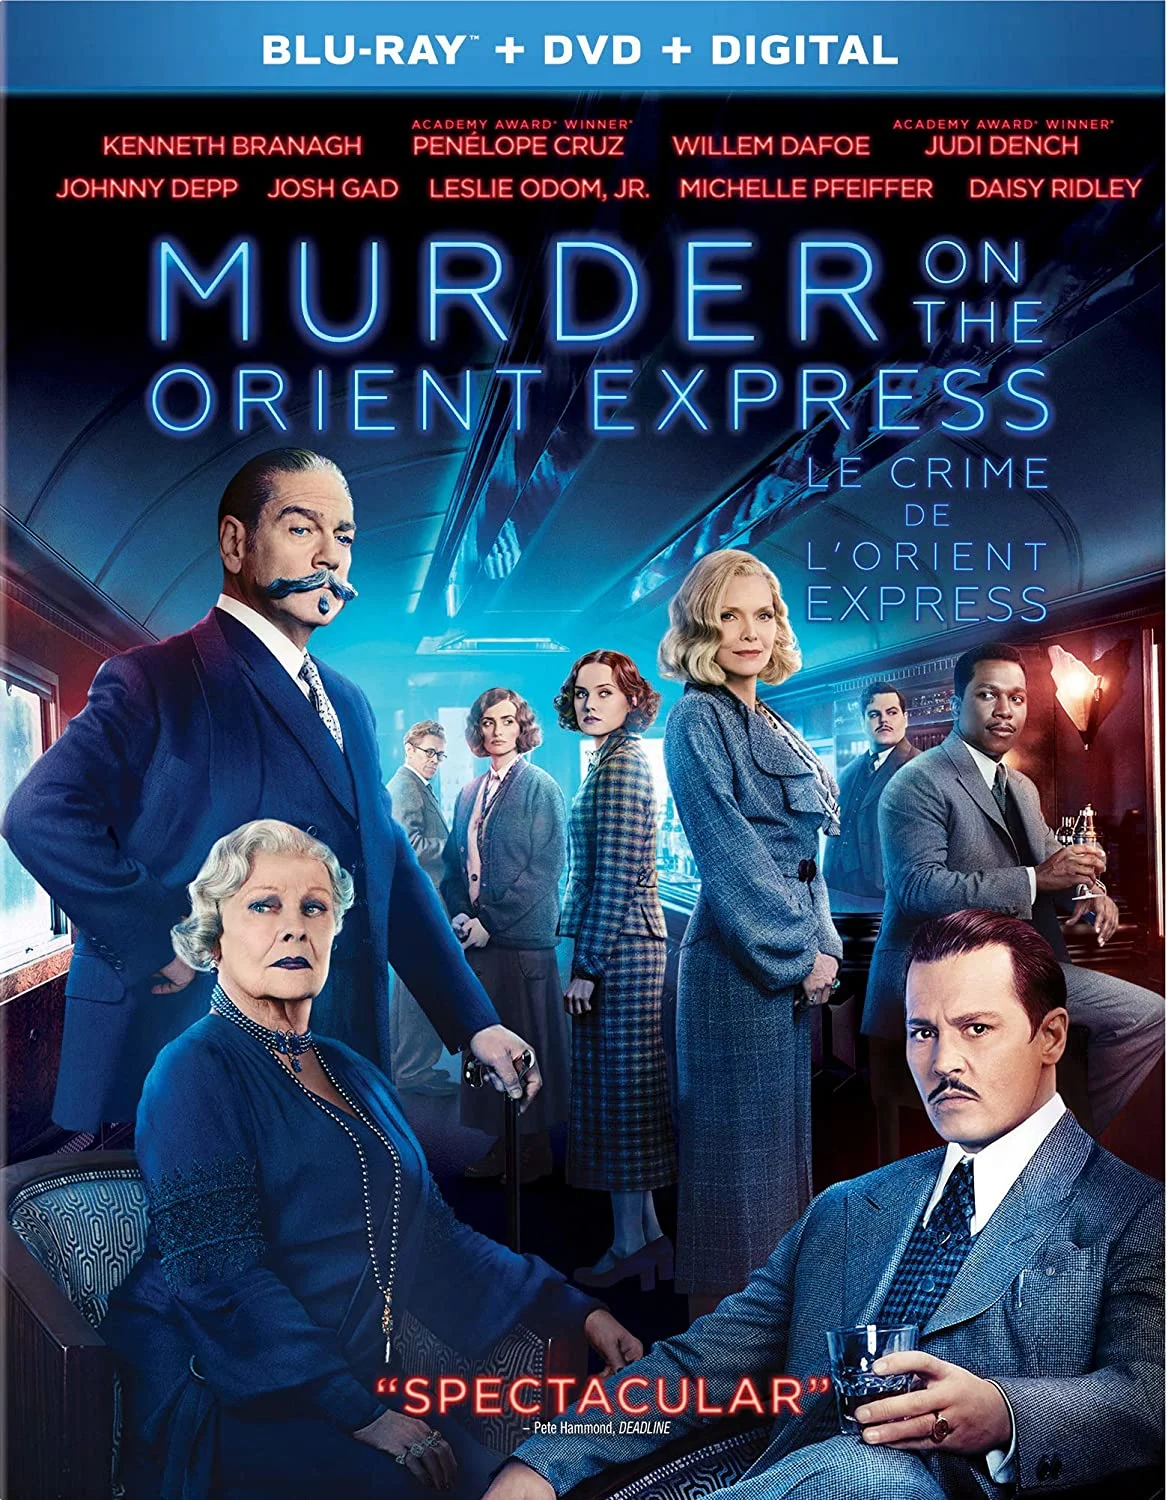 Murder On The Orient Express (Blu-ray/DVD Combo) on MovieShack